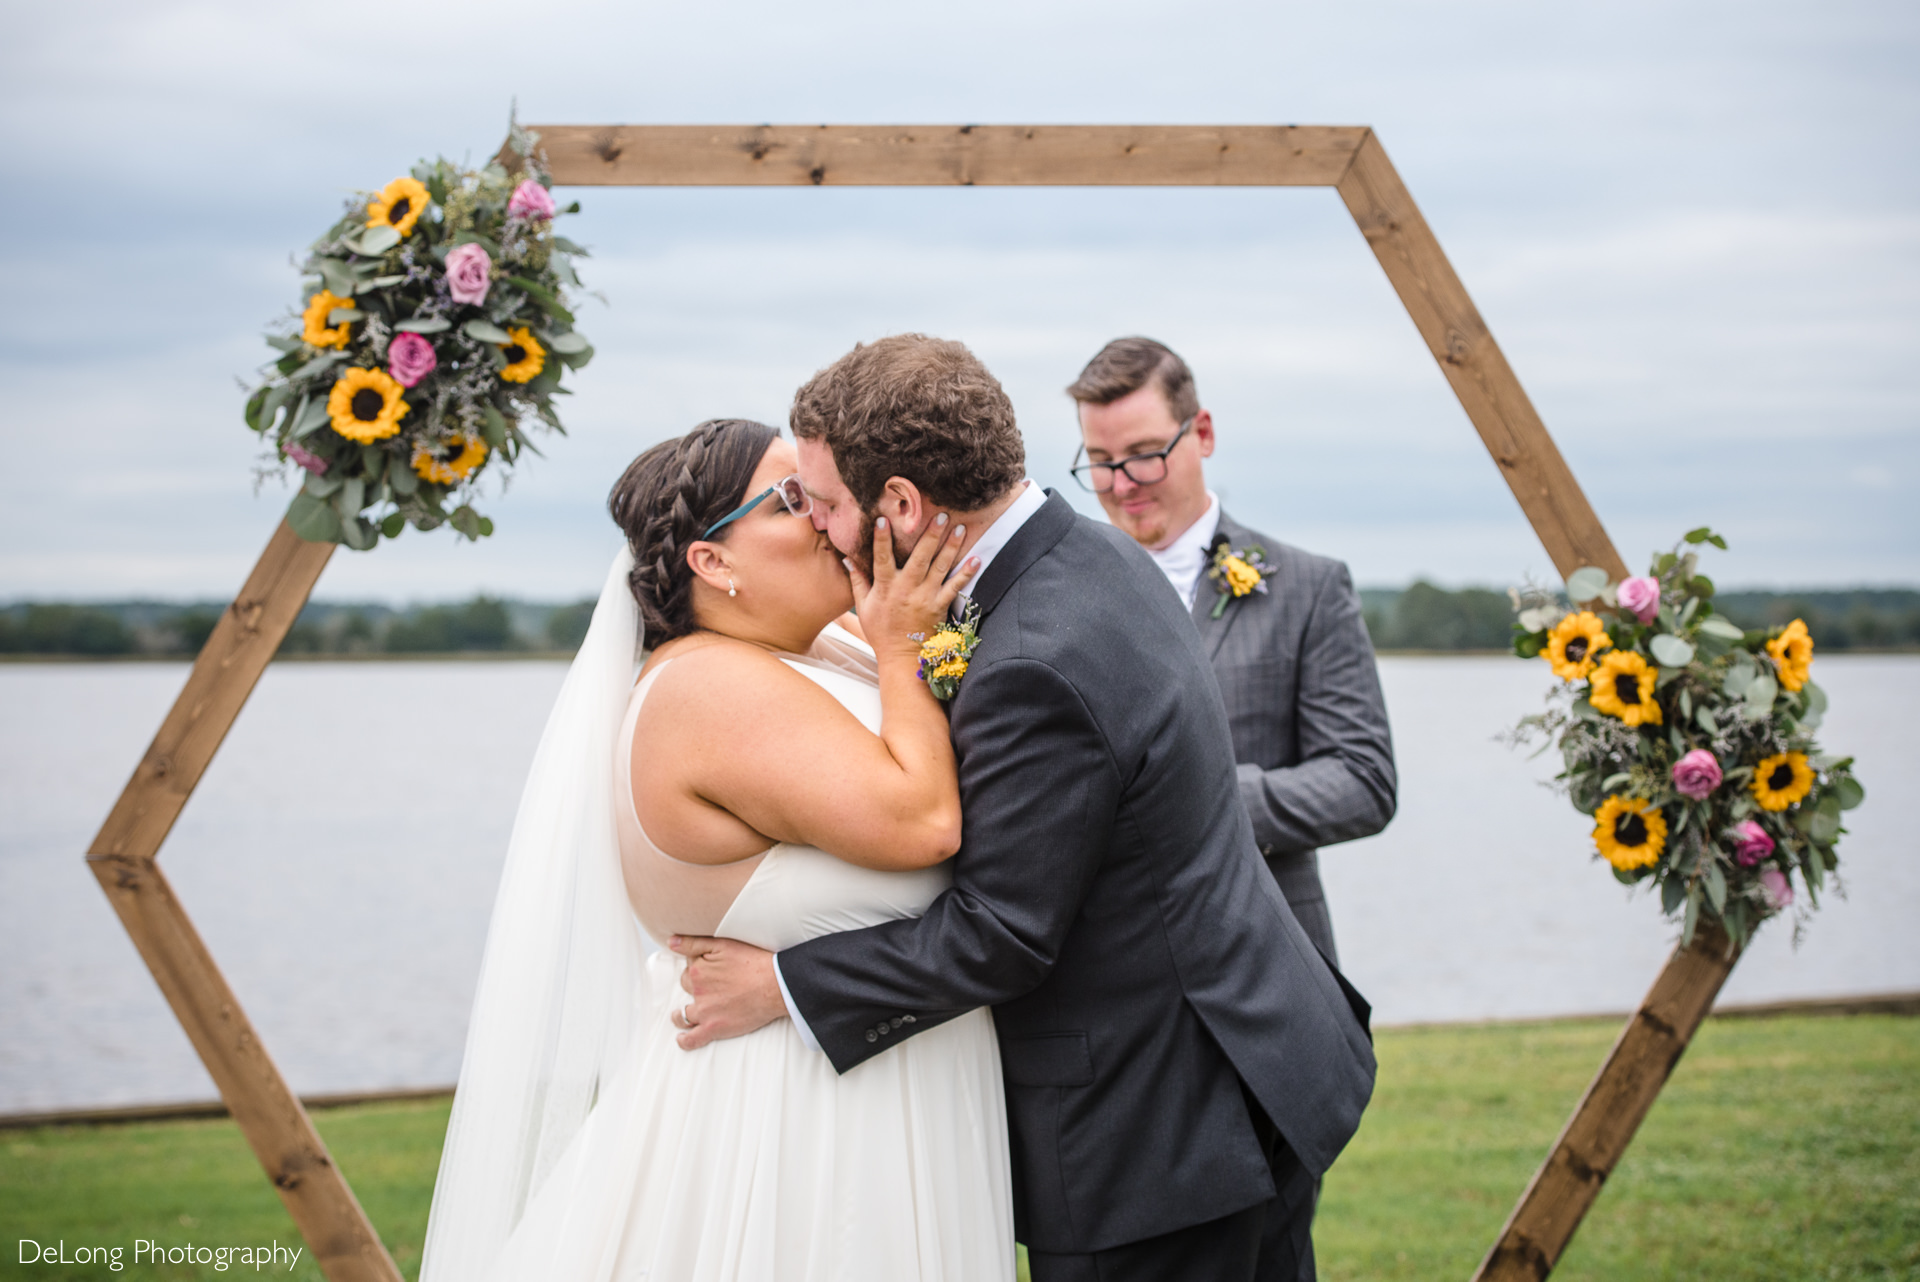 Wedding first kiss with hexagonal arbor adorned with sunflowers at the Island House in Charleston, SC by Charlotte Wedding Photographers DeLong Photography